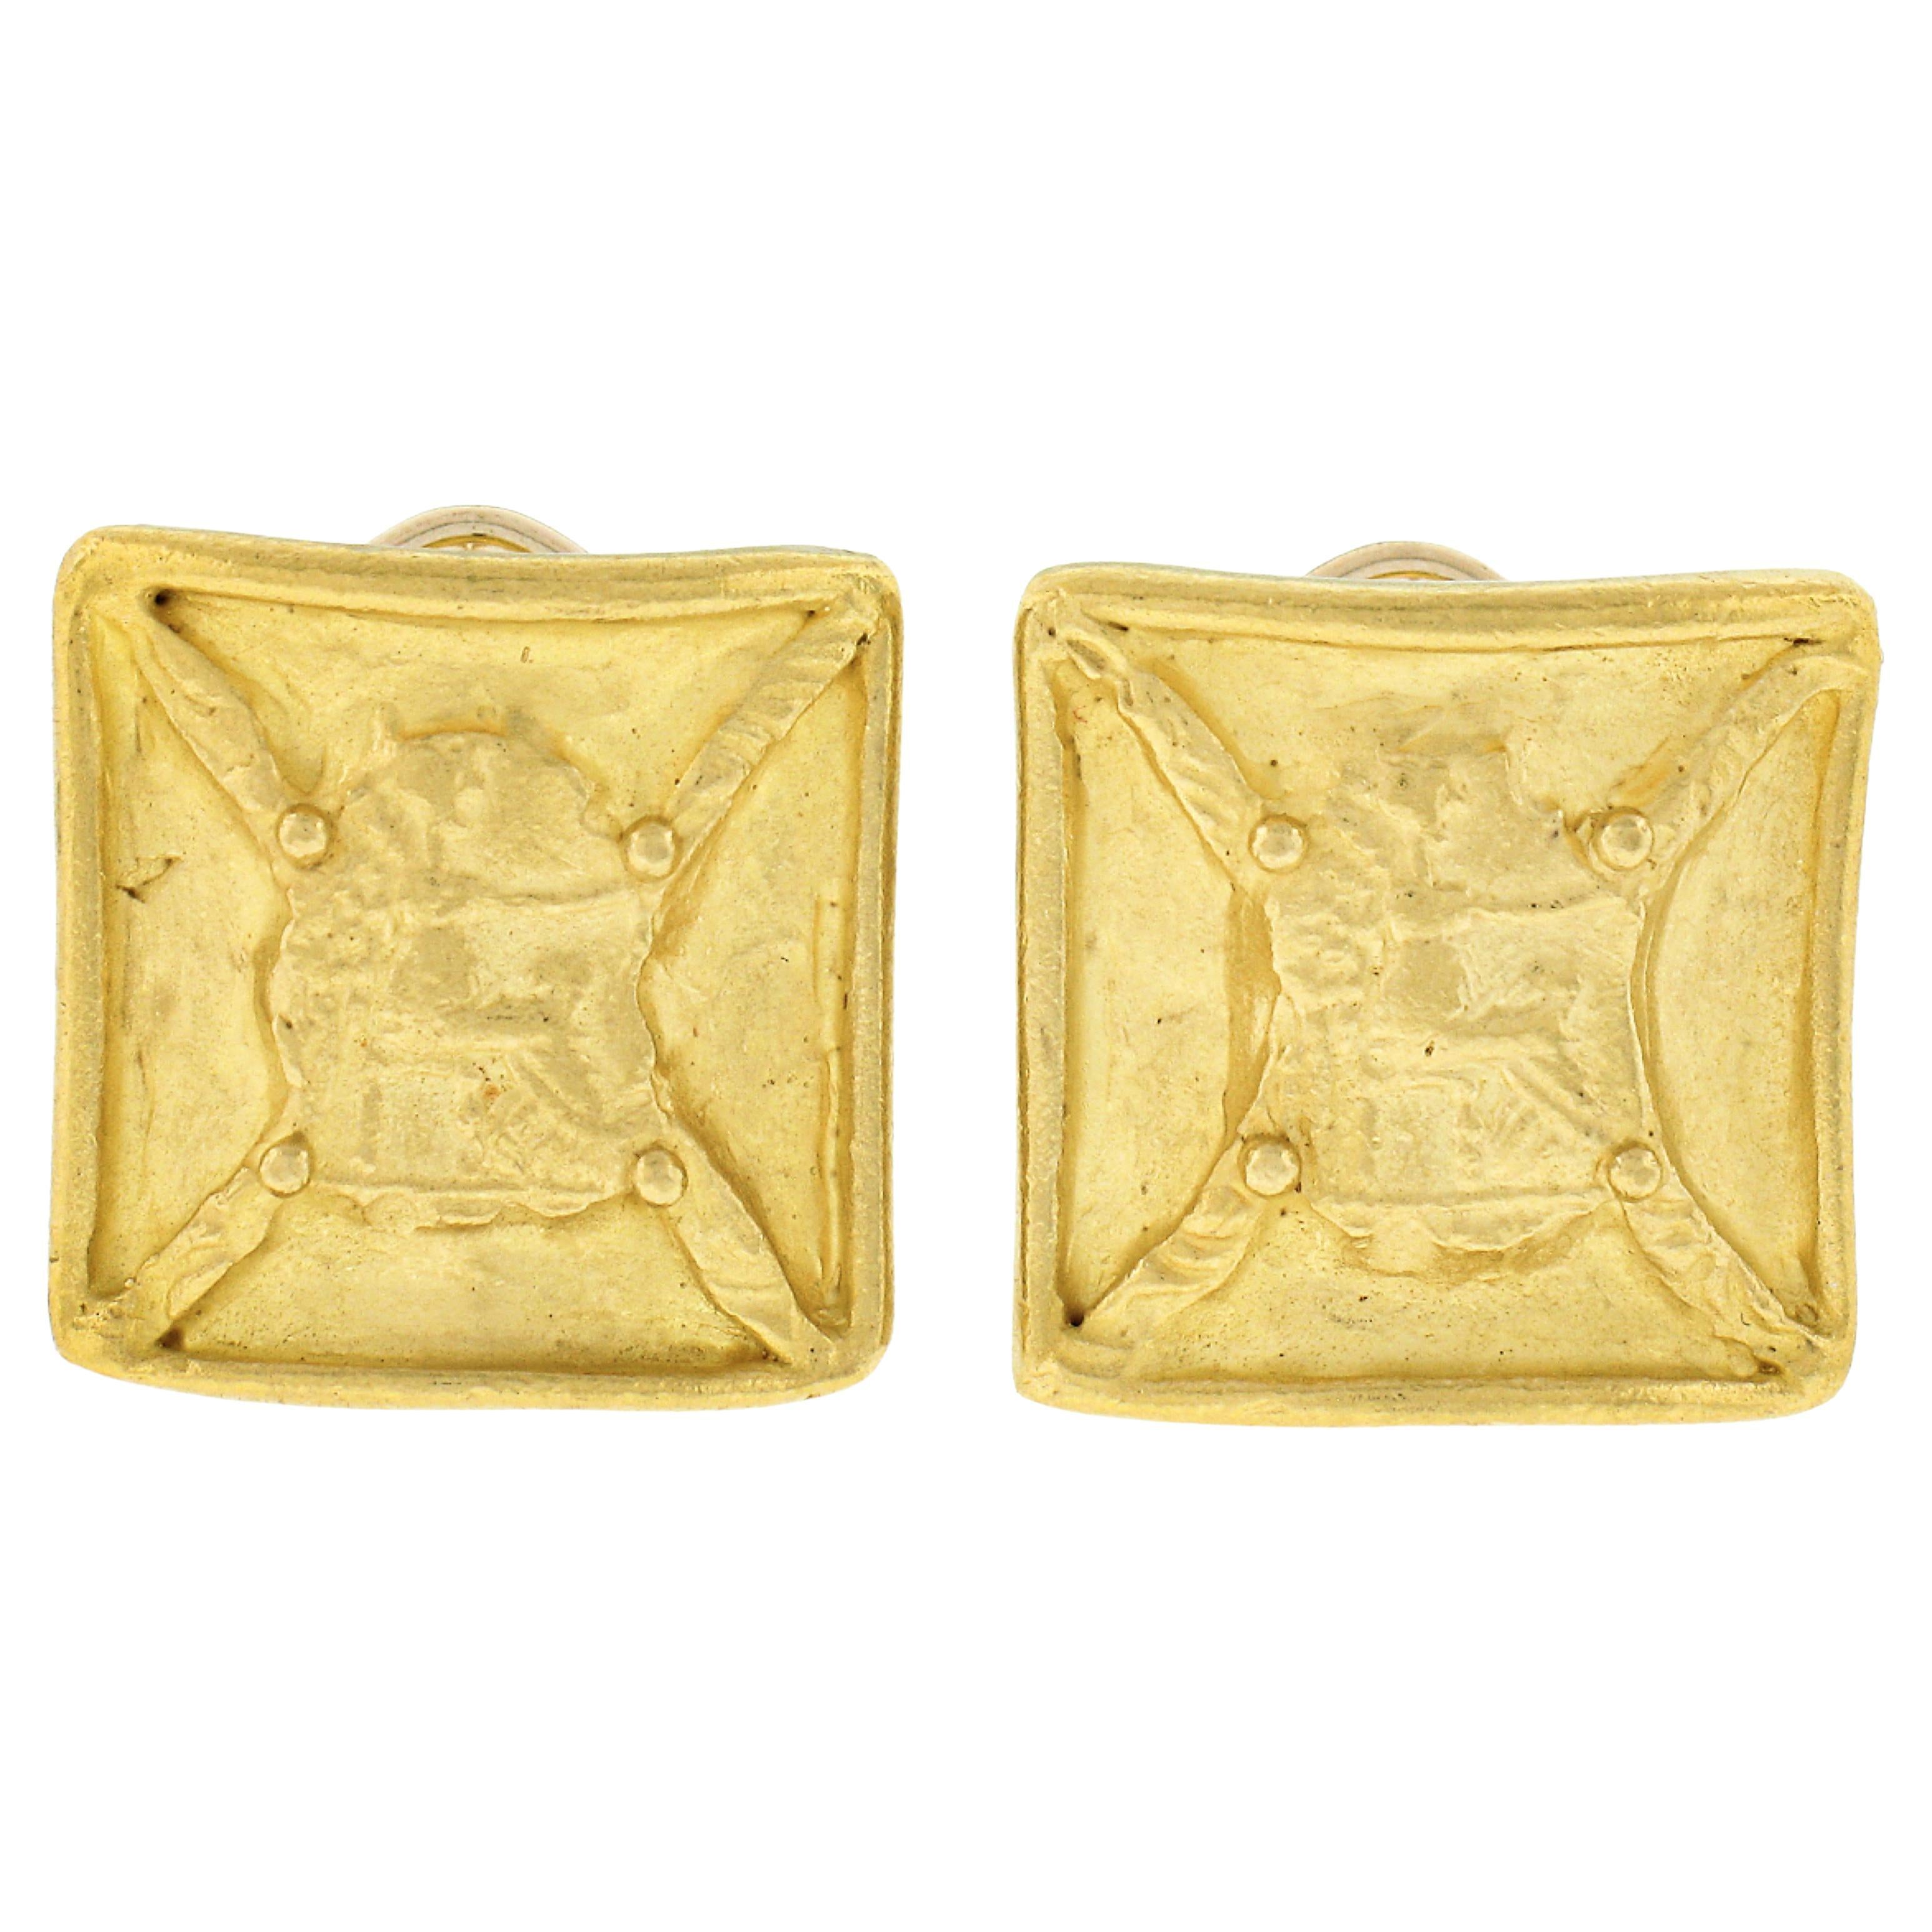 Denise Roberge 22K Gold Detailed Textured Shield Seal Squared Button Earrings